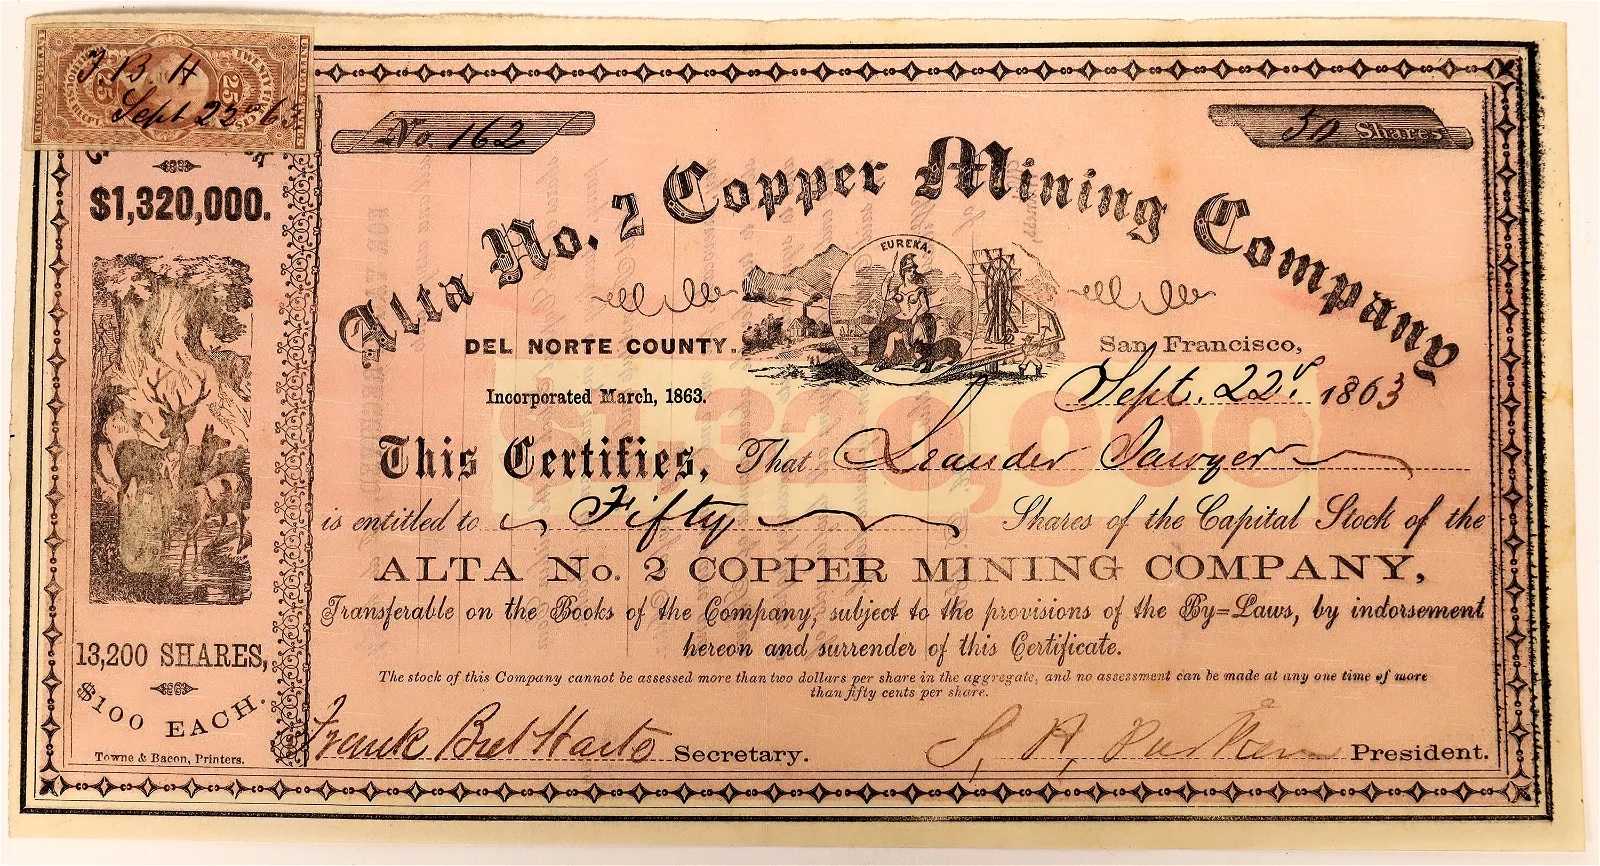 Alta No. 2 Copper Mining Co. stock certificate signed by Bret Harte, estimated at $3,000-$8,000 at Holabird.